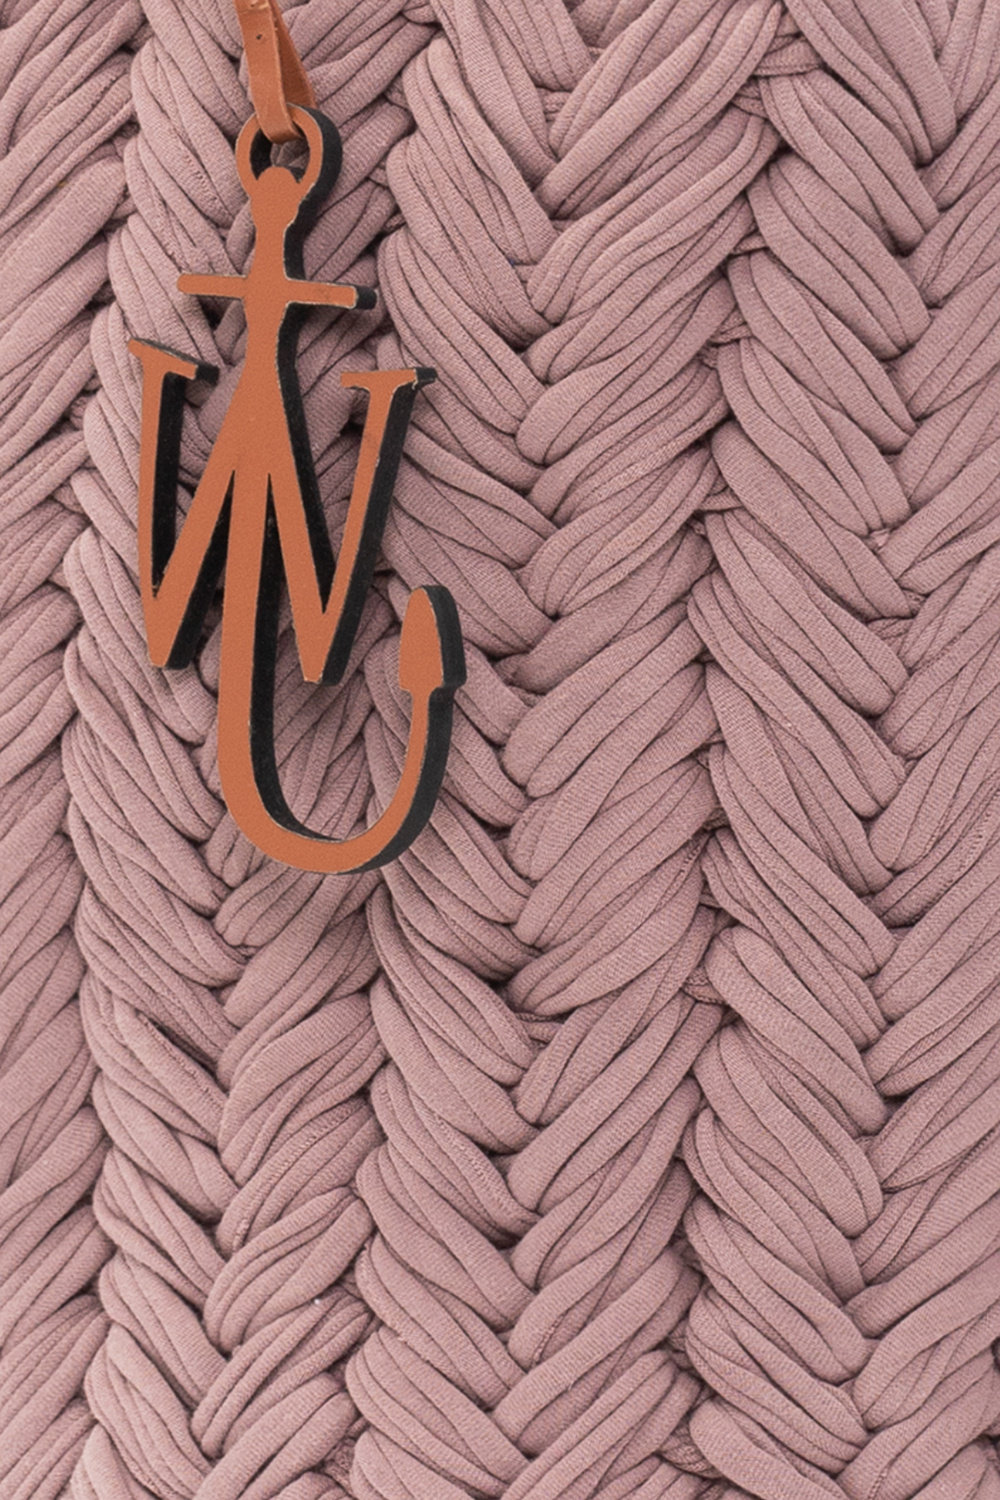 JW Anderson ‘Knitted’ shopper bag